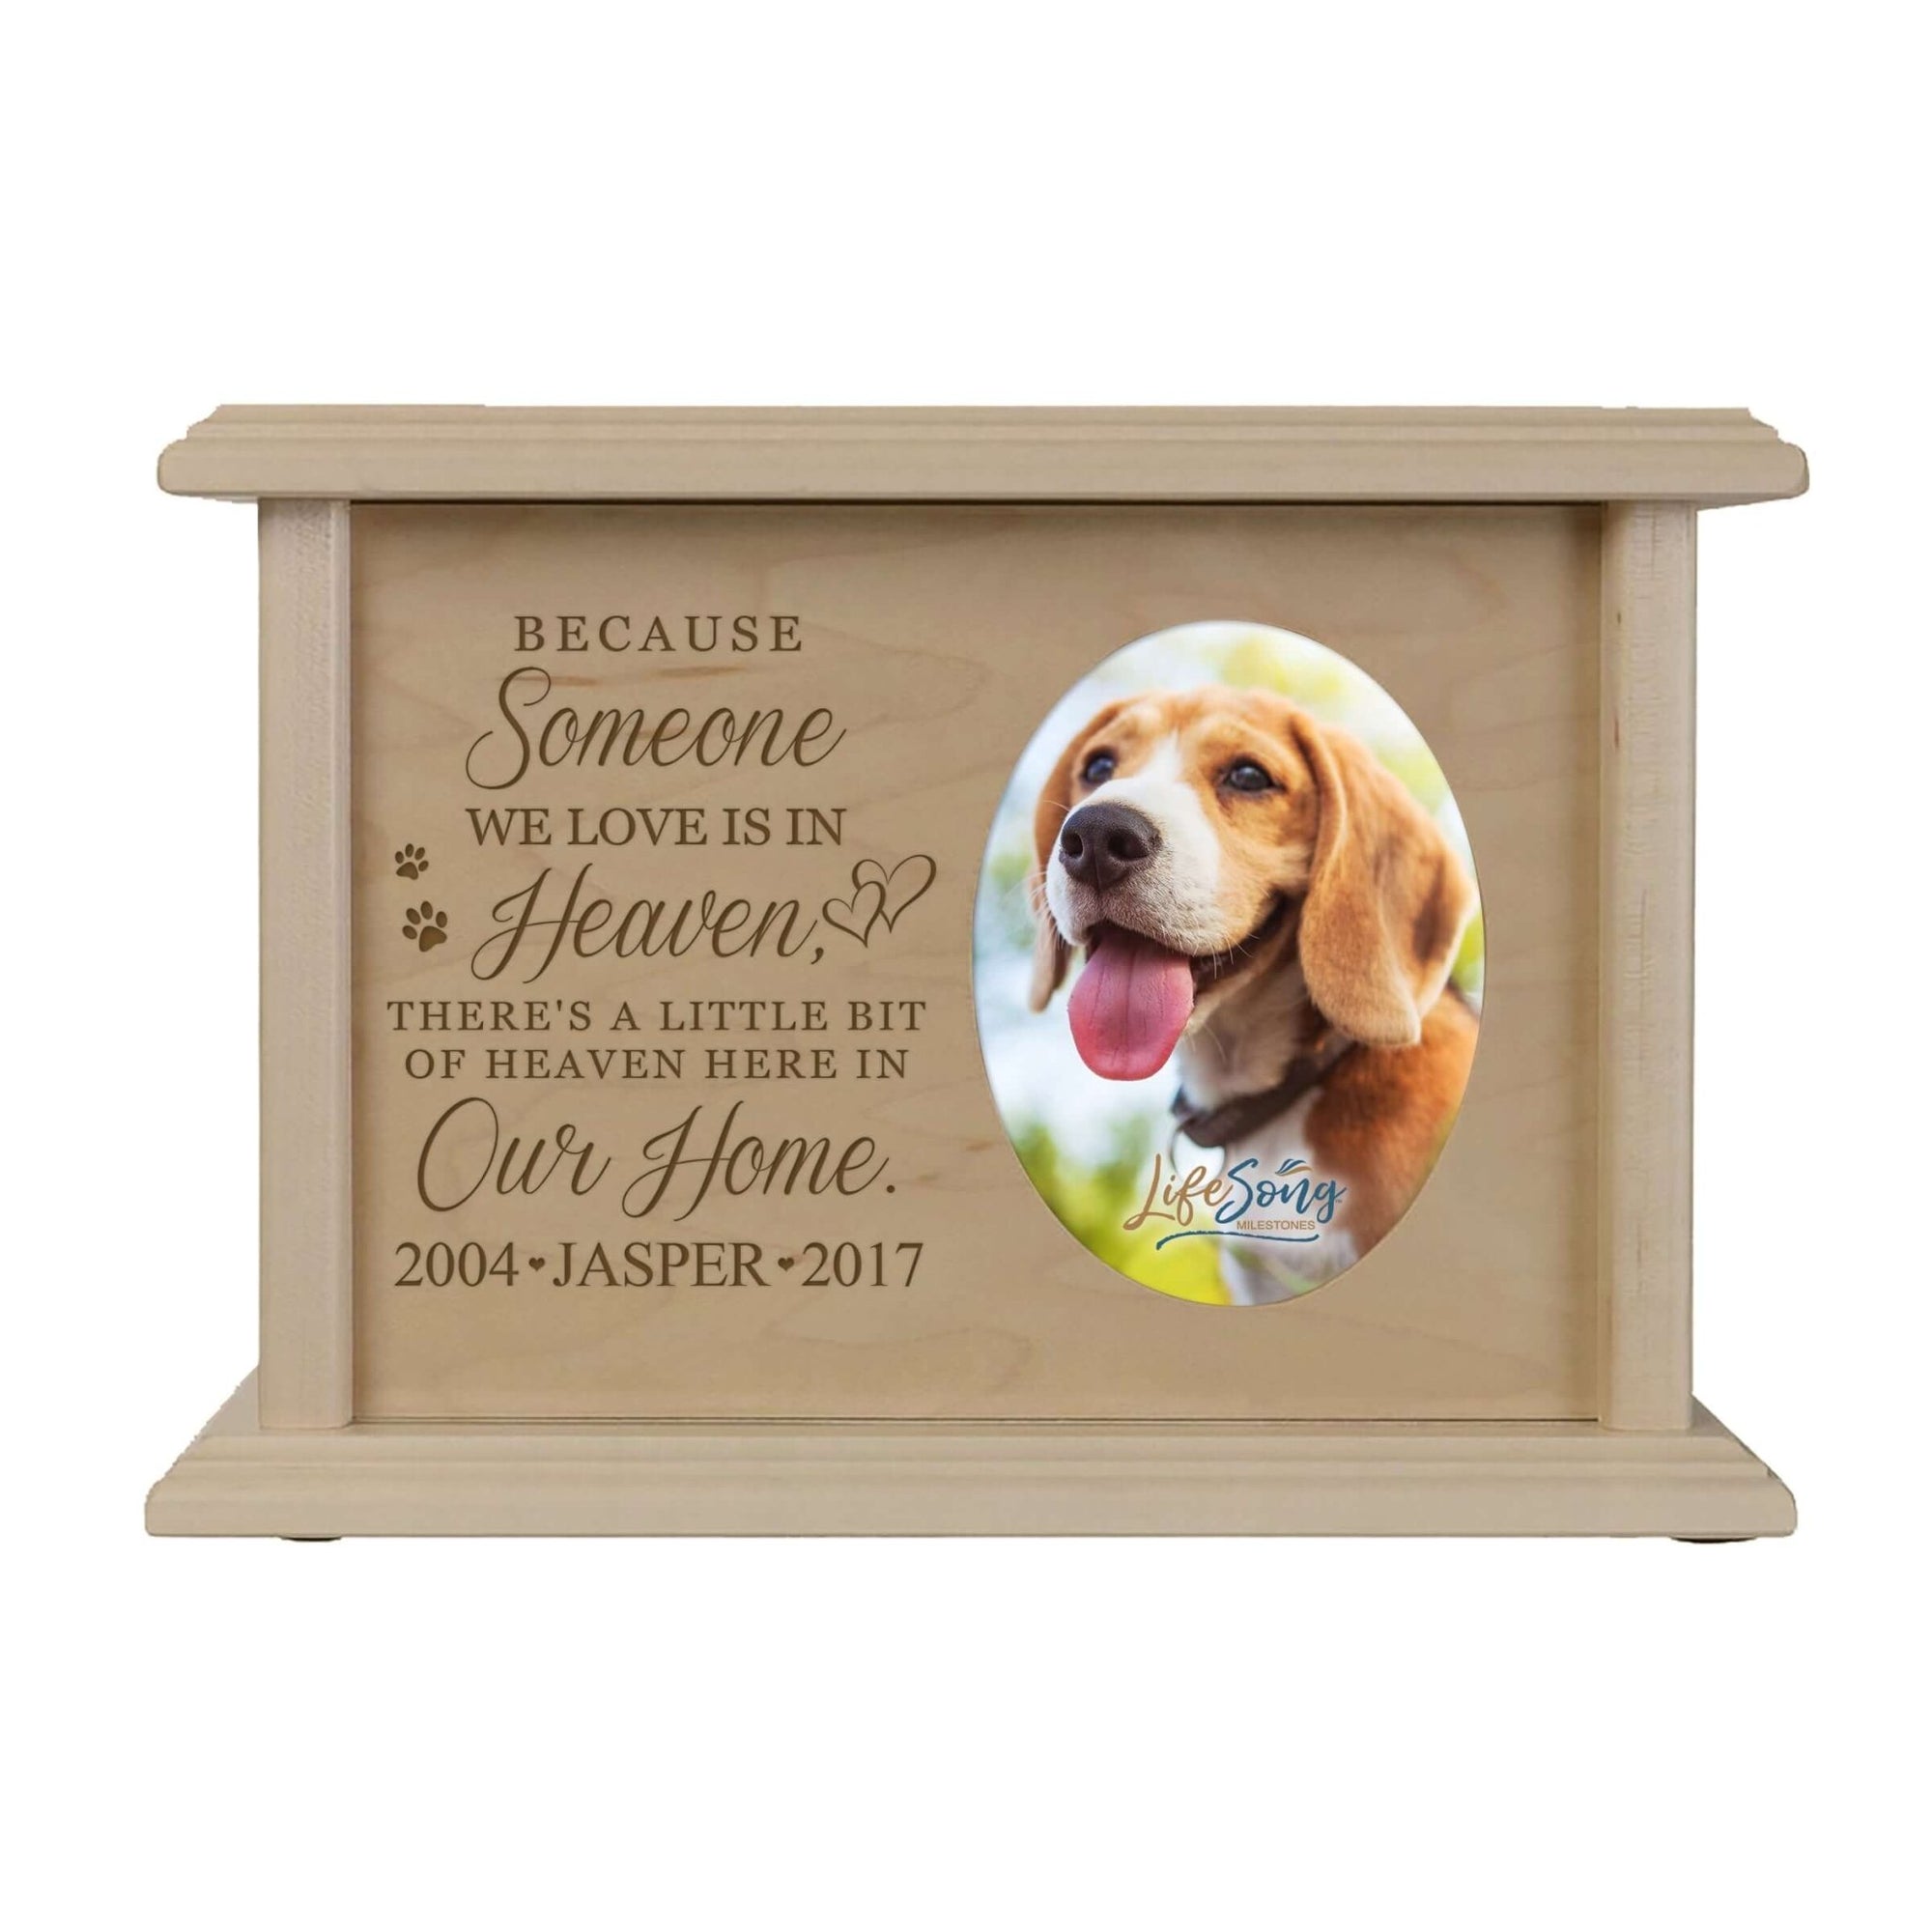 Pet Memorial Picture Cremation Urn Box for Dog or Cat - Because Someone We Love Is In Heaven - LifeSong Milestones